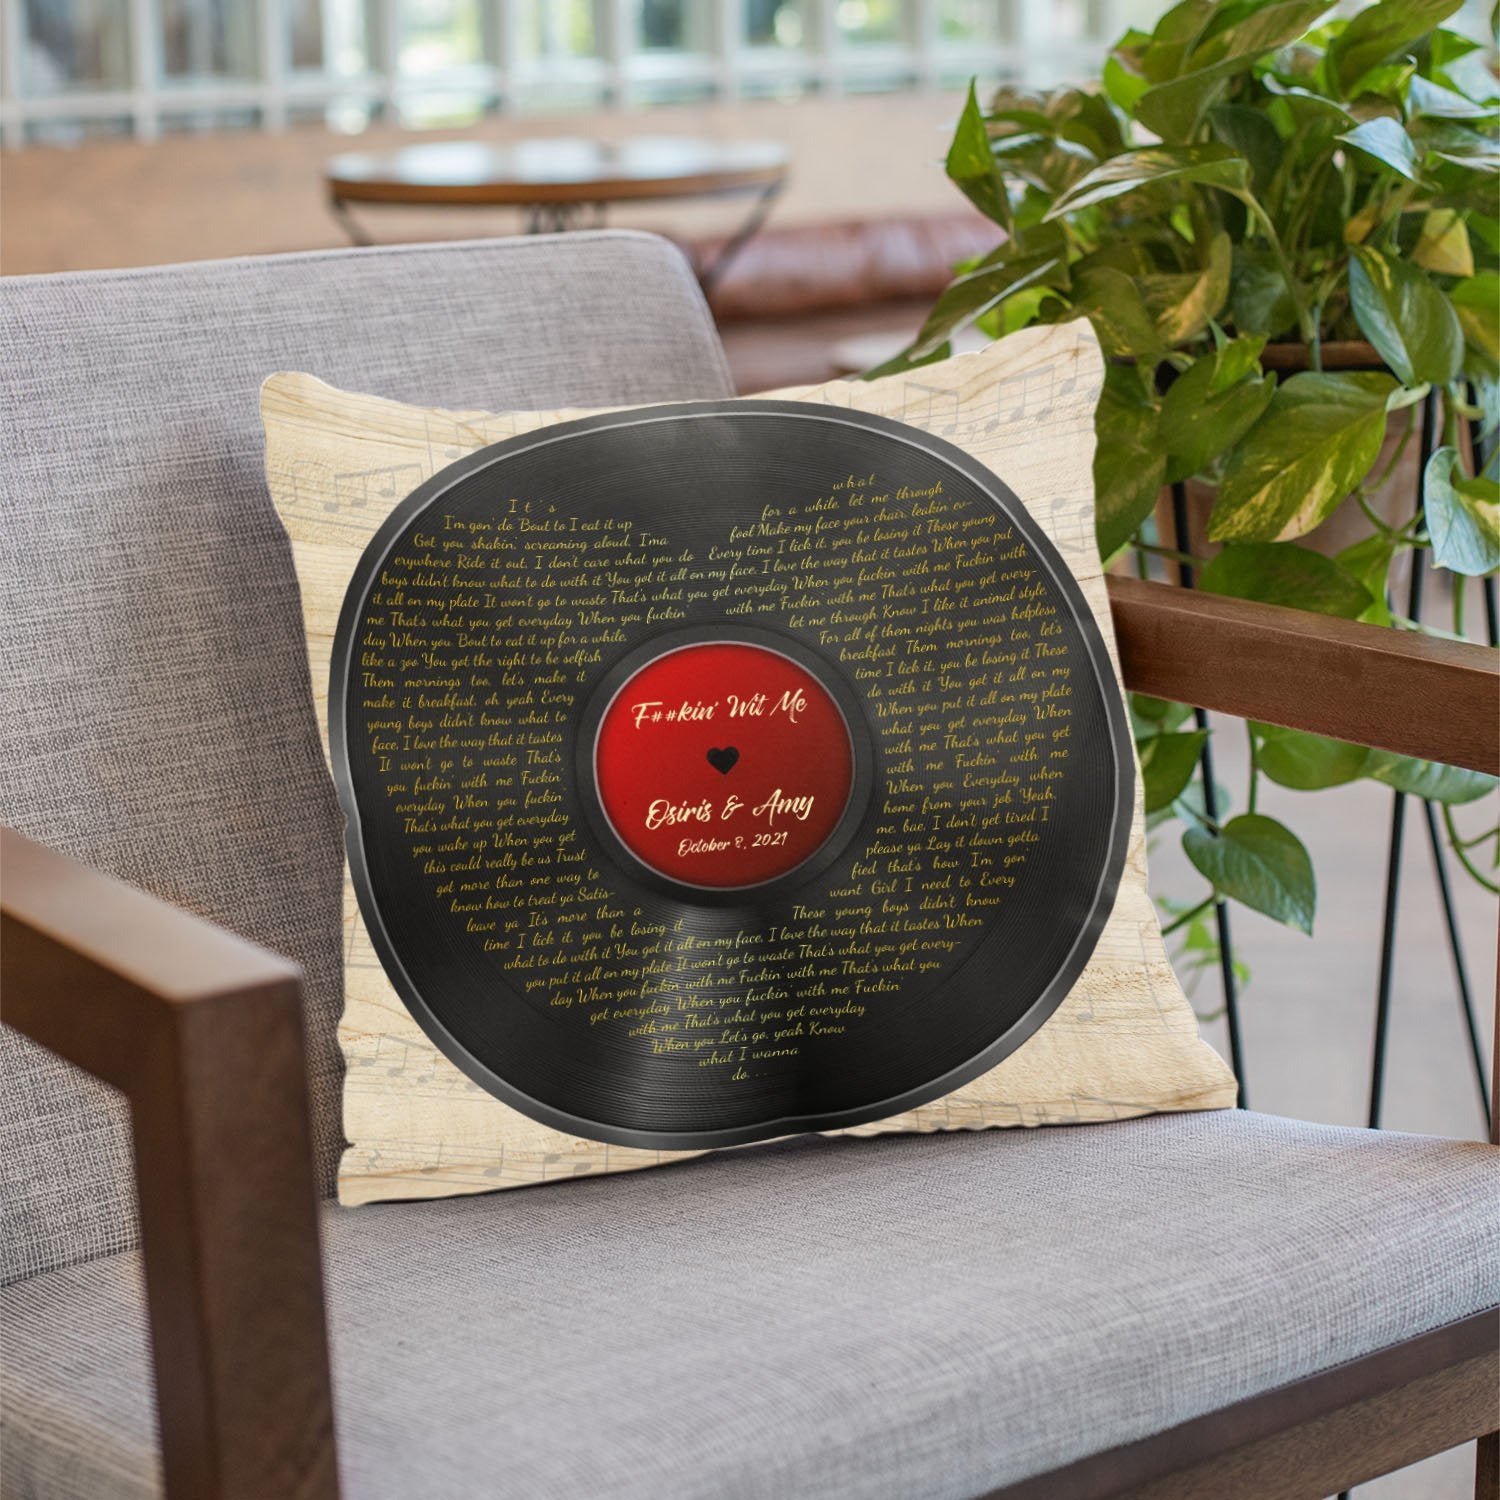 Custom Song Lyrics, Heart Shape, Vinyl Record, Personalized Song Name And Text, Pillow